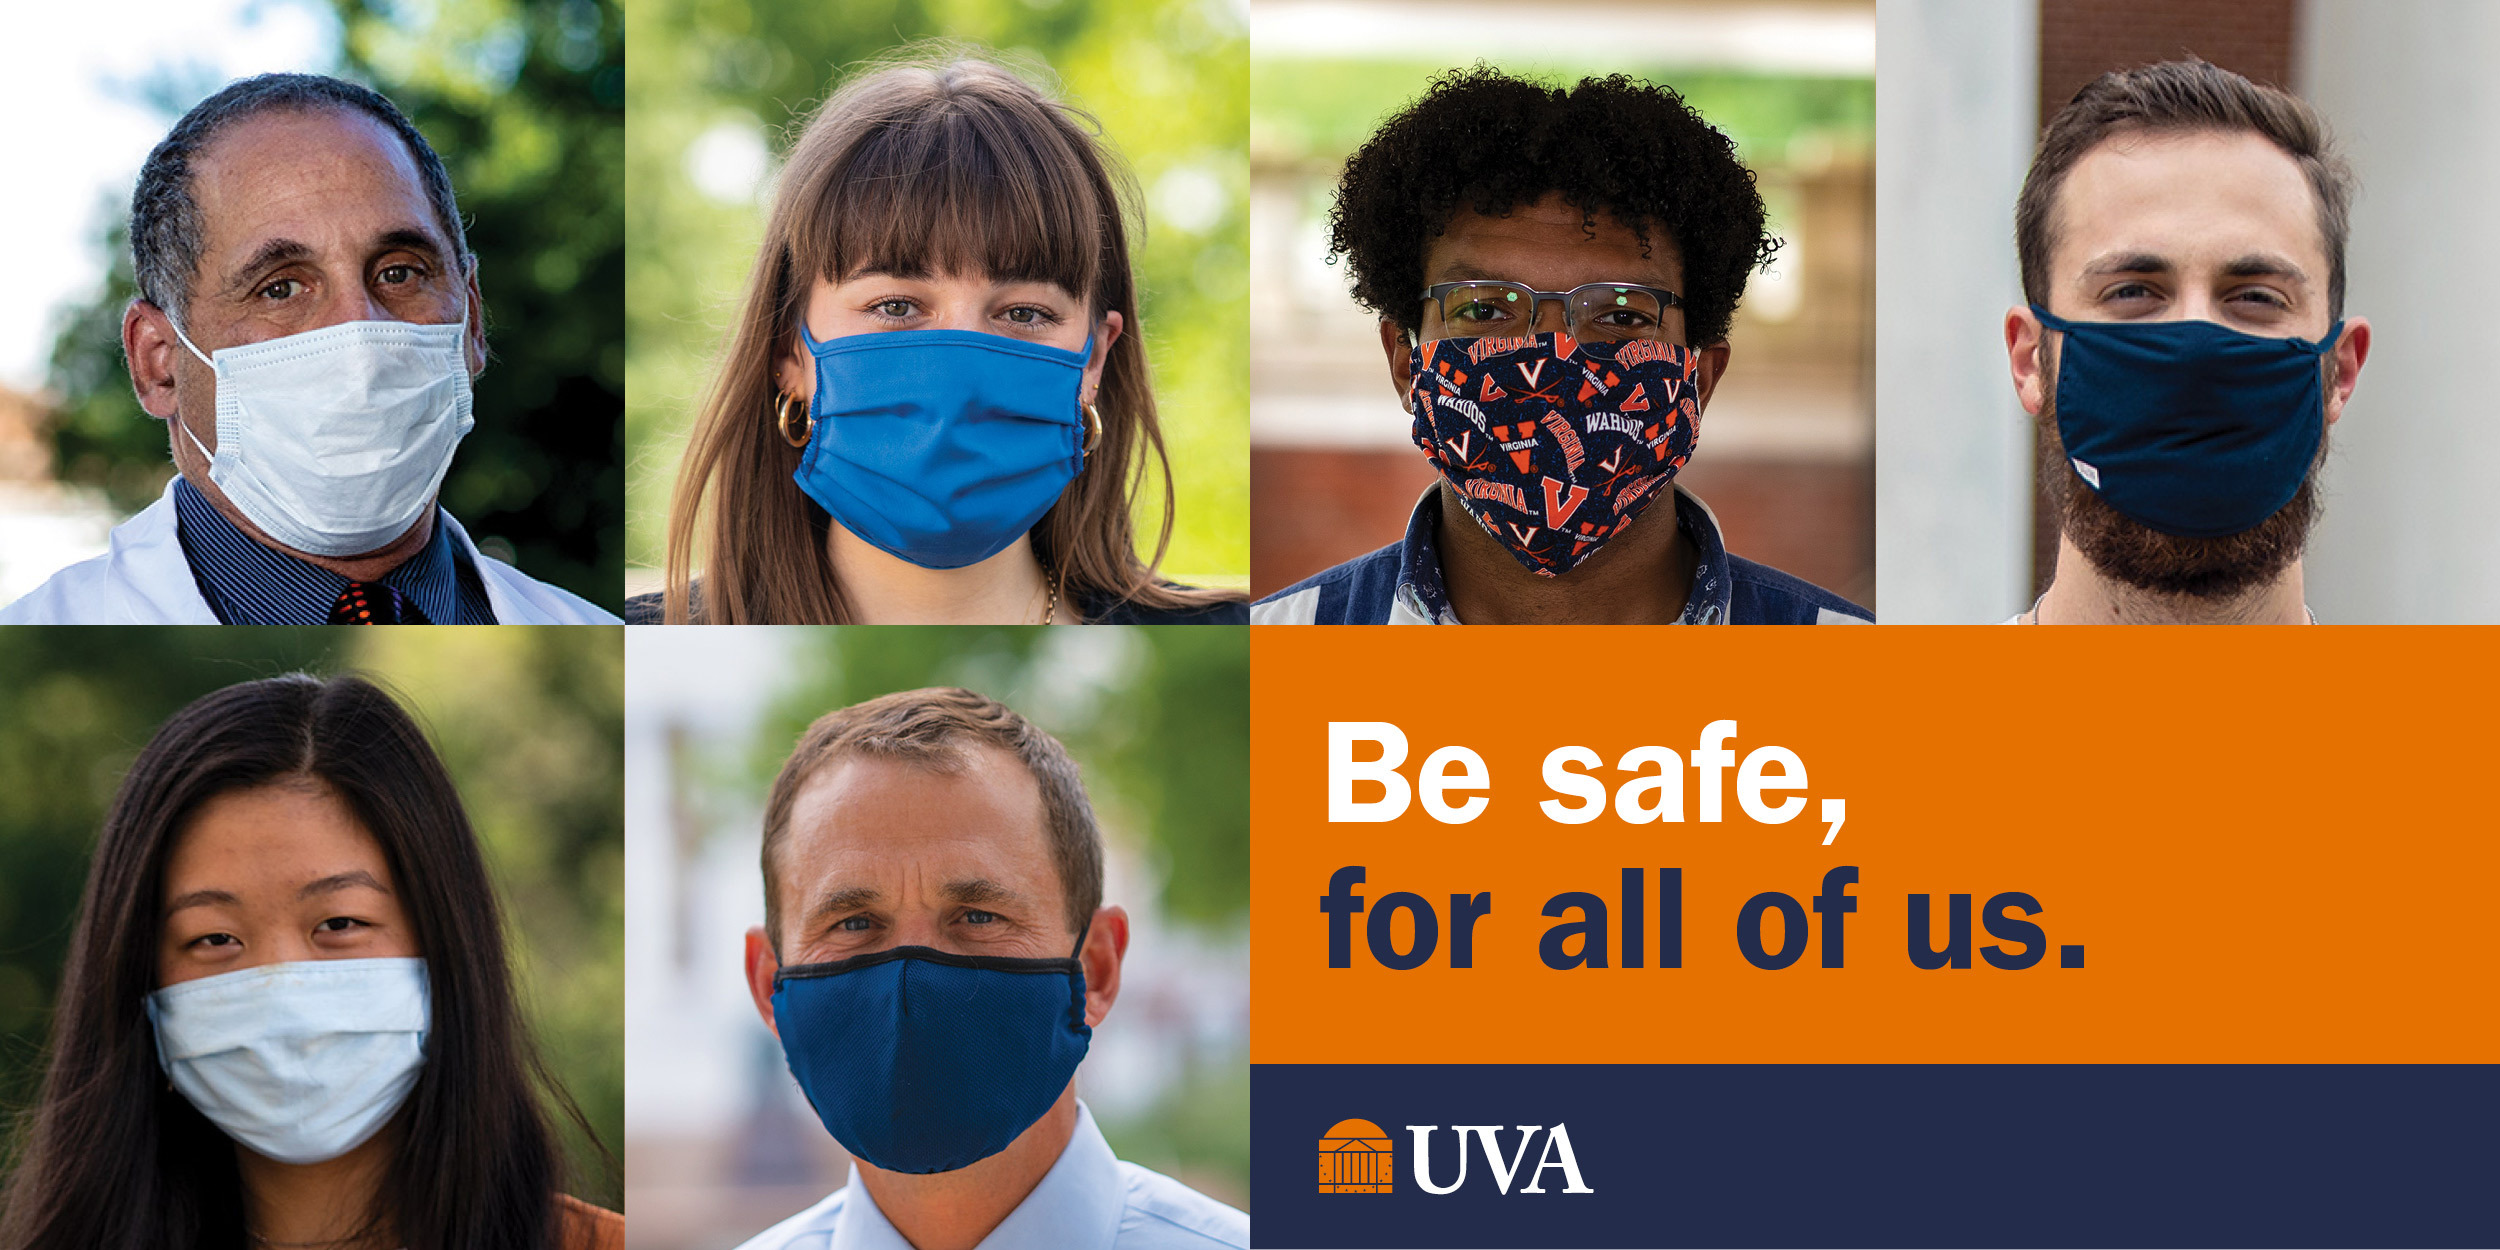 Be safe, for all of us. -UVA